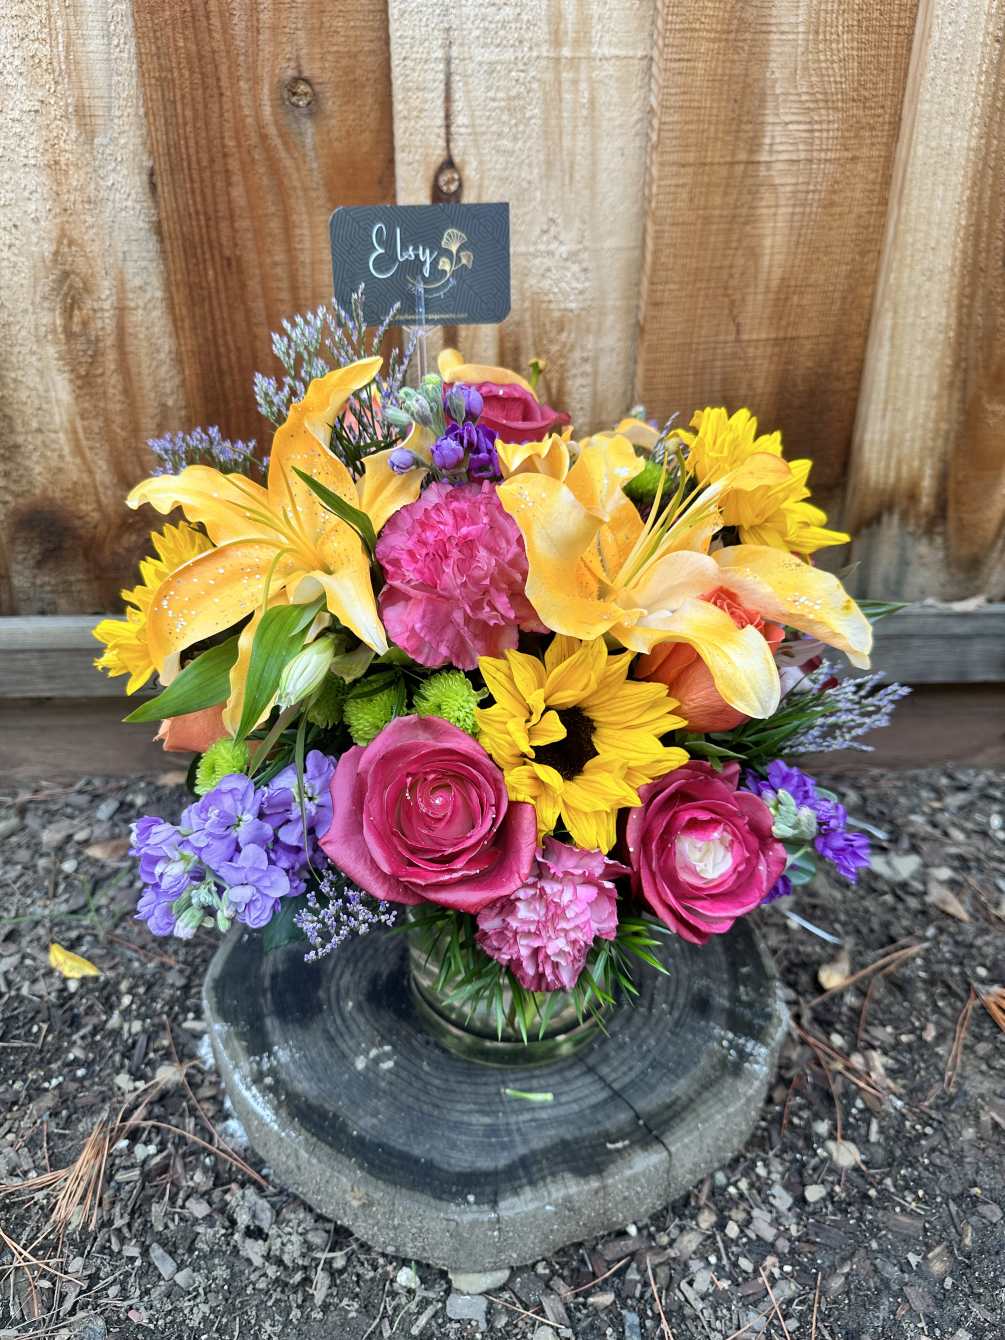 Introducing our radiant floral arrangement, a symphony of colors featuring gerbera daisies